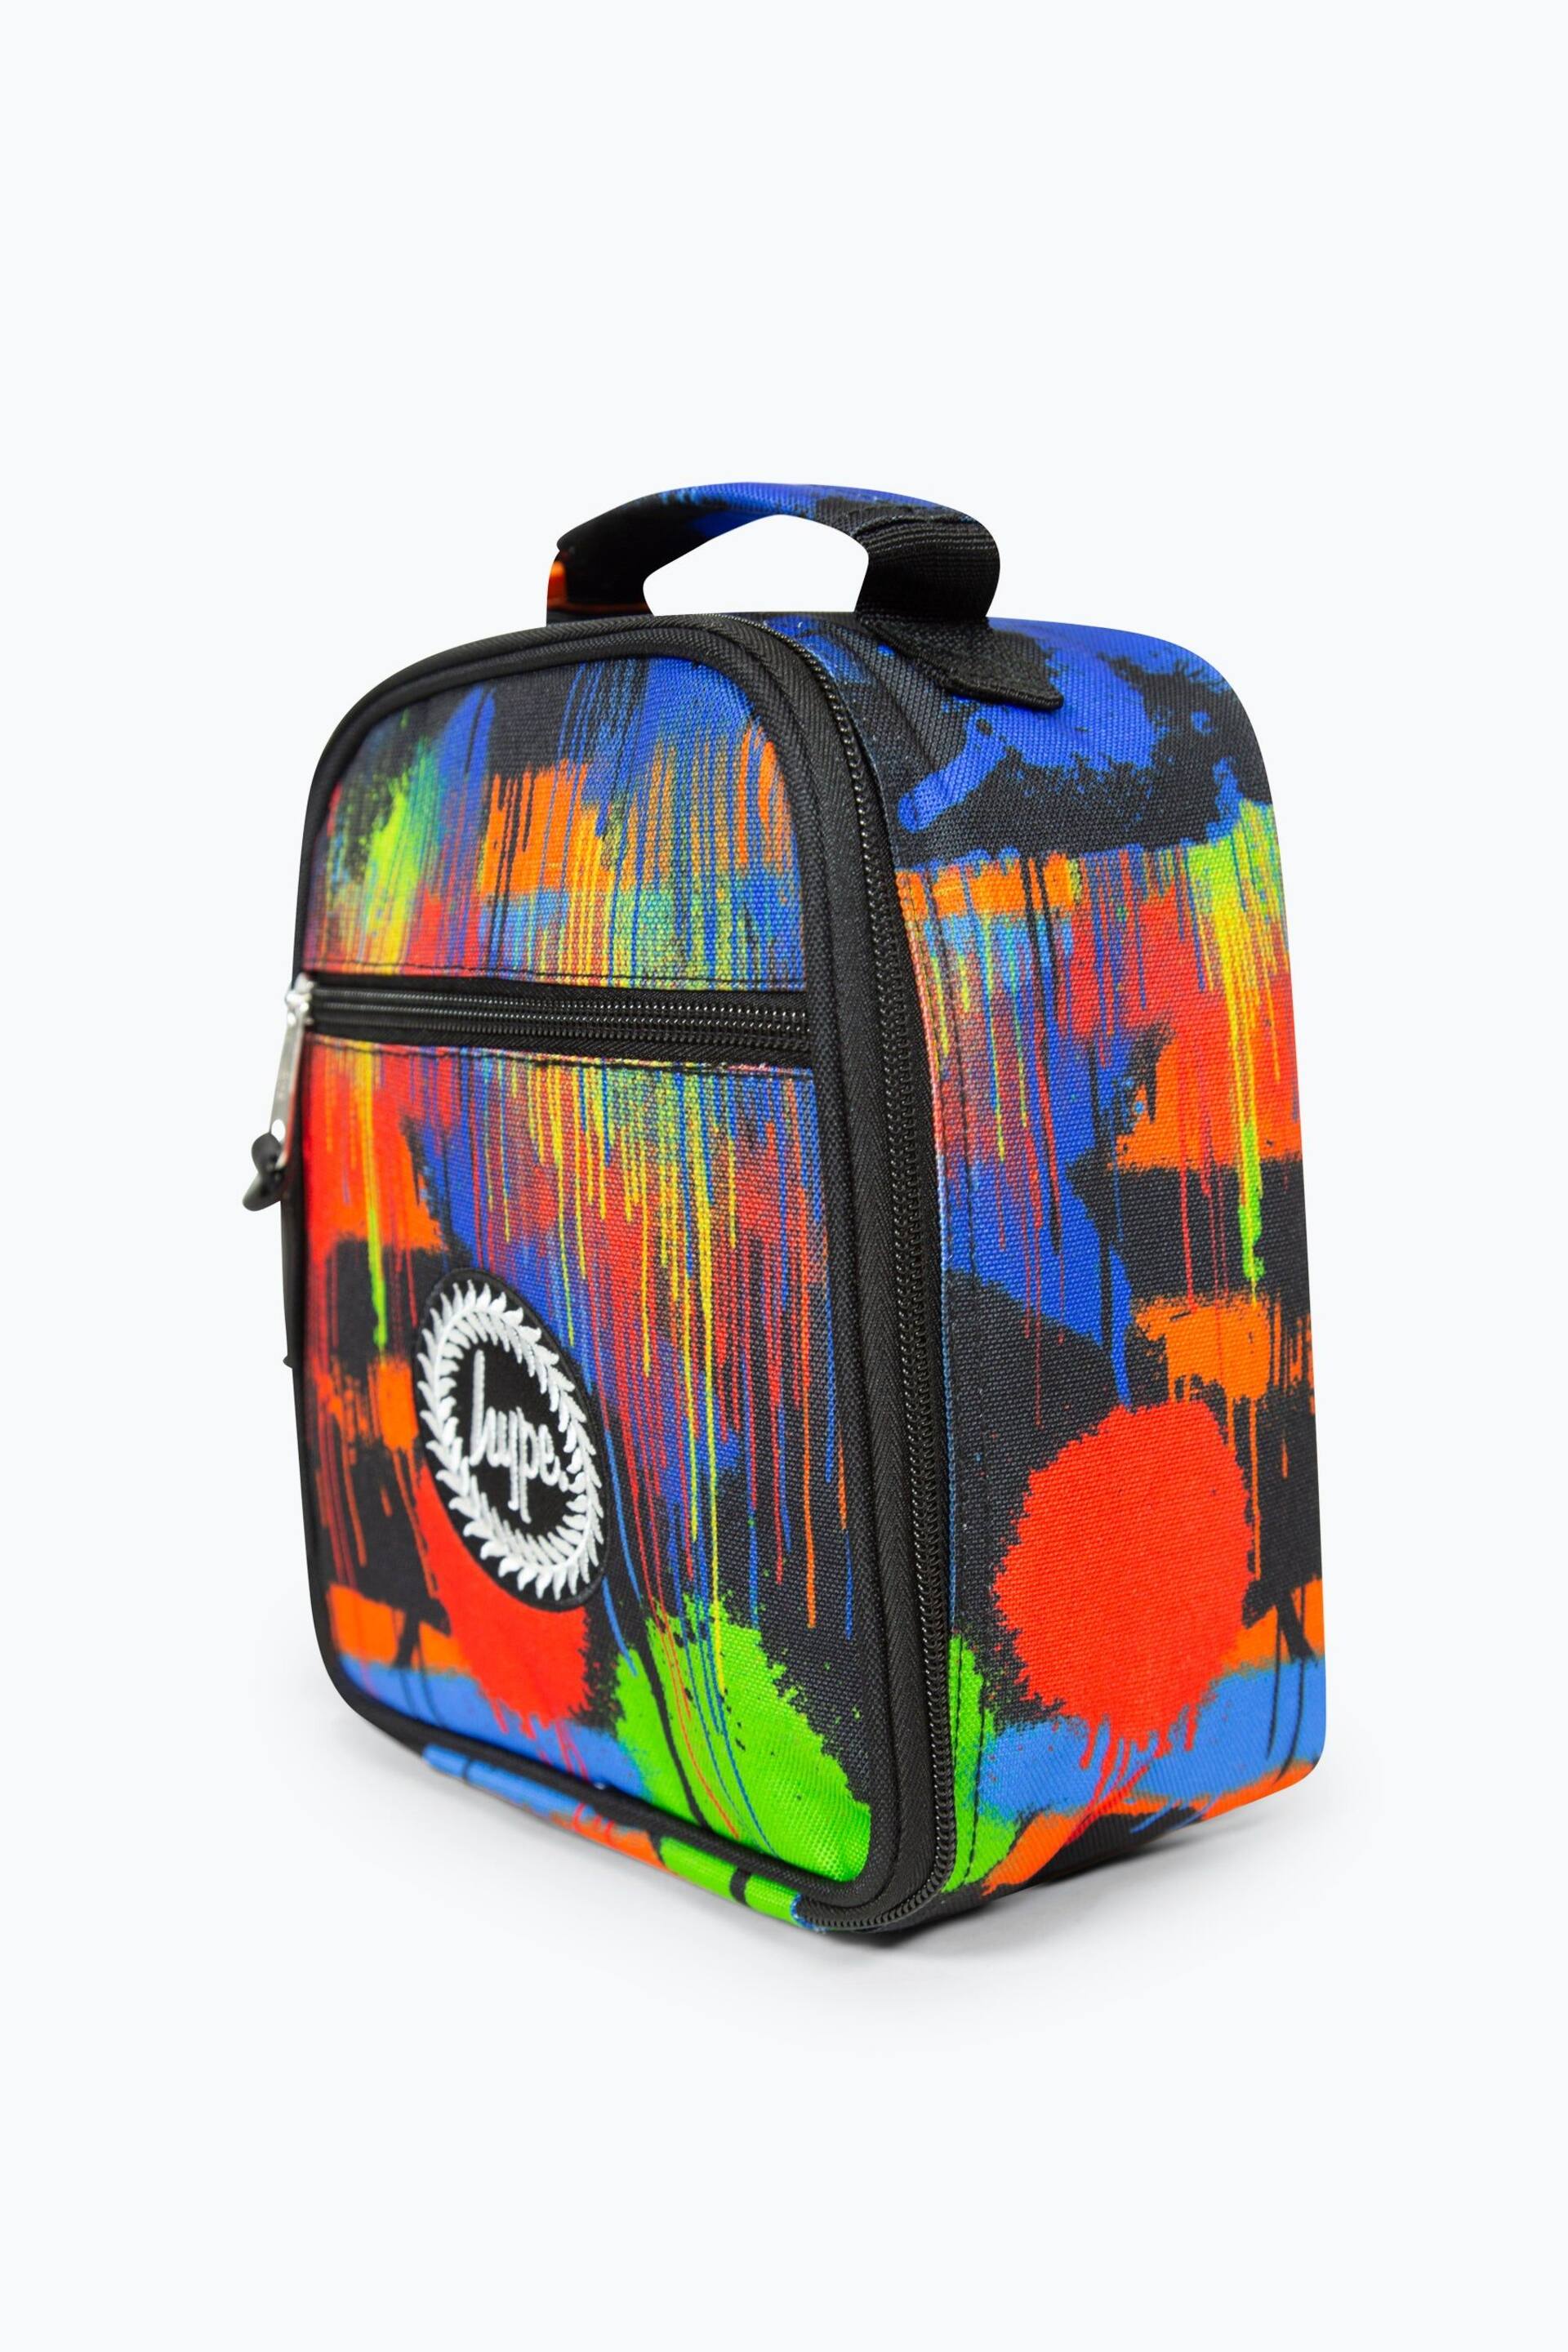 Hype. Multi Spray Paint Lunch Box - Image 4 of 8